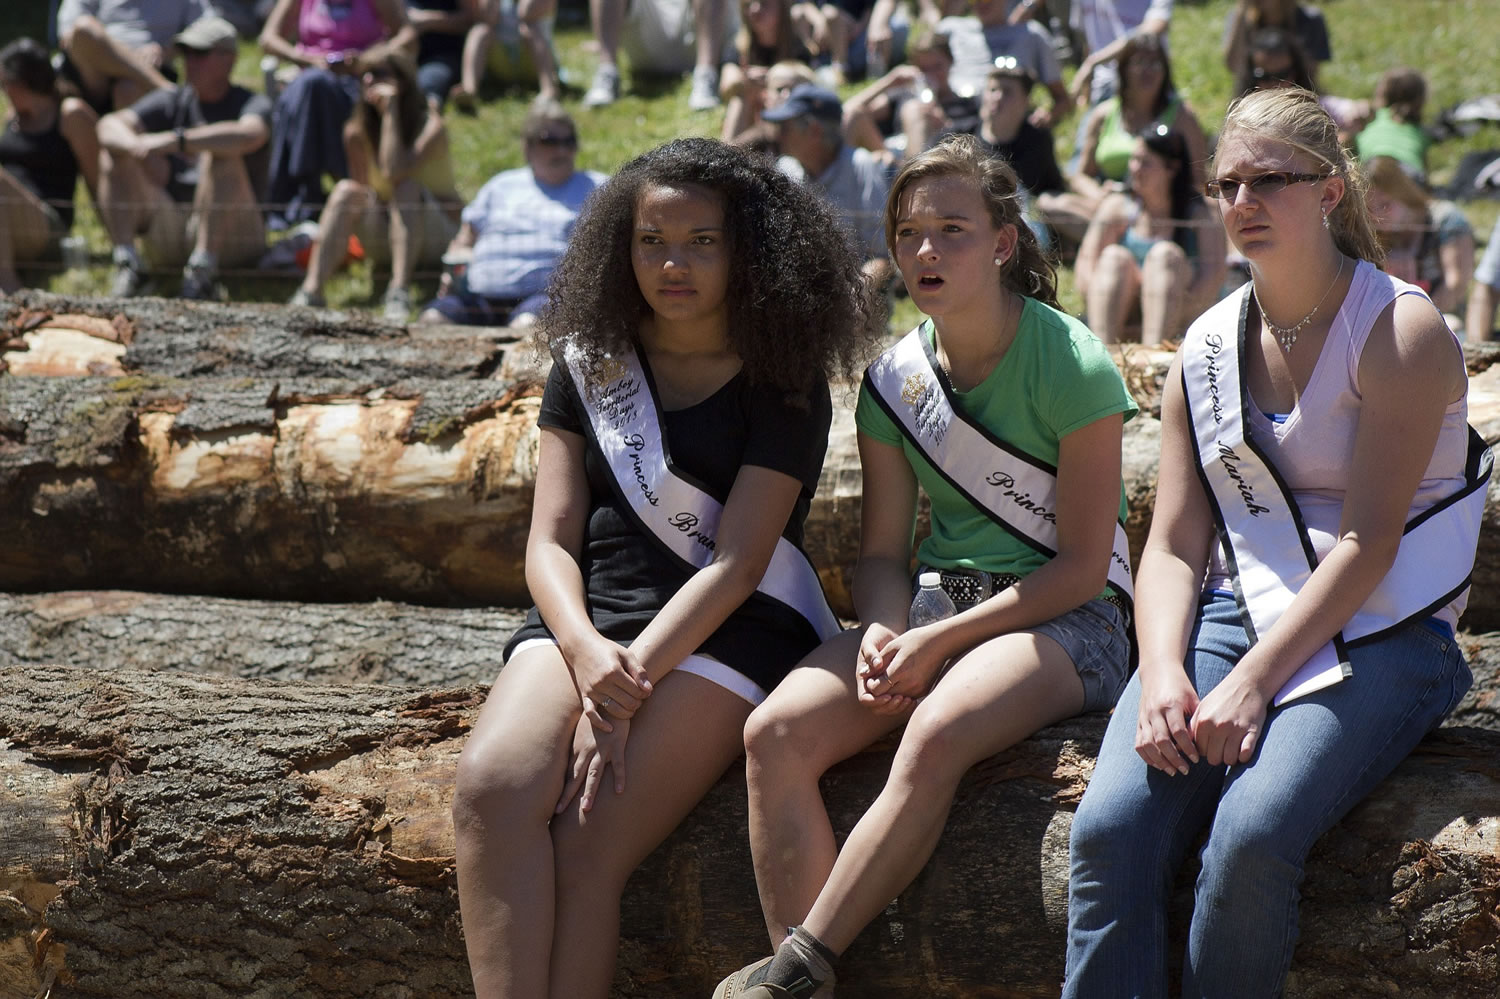 Princesses Brandi Stokes, 14, from left, Sierra Joner, 14, and Mariah Goff, 14, sit on logs as they watch the Amboy Logging Show on Saturday.